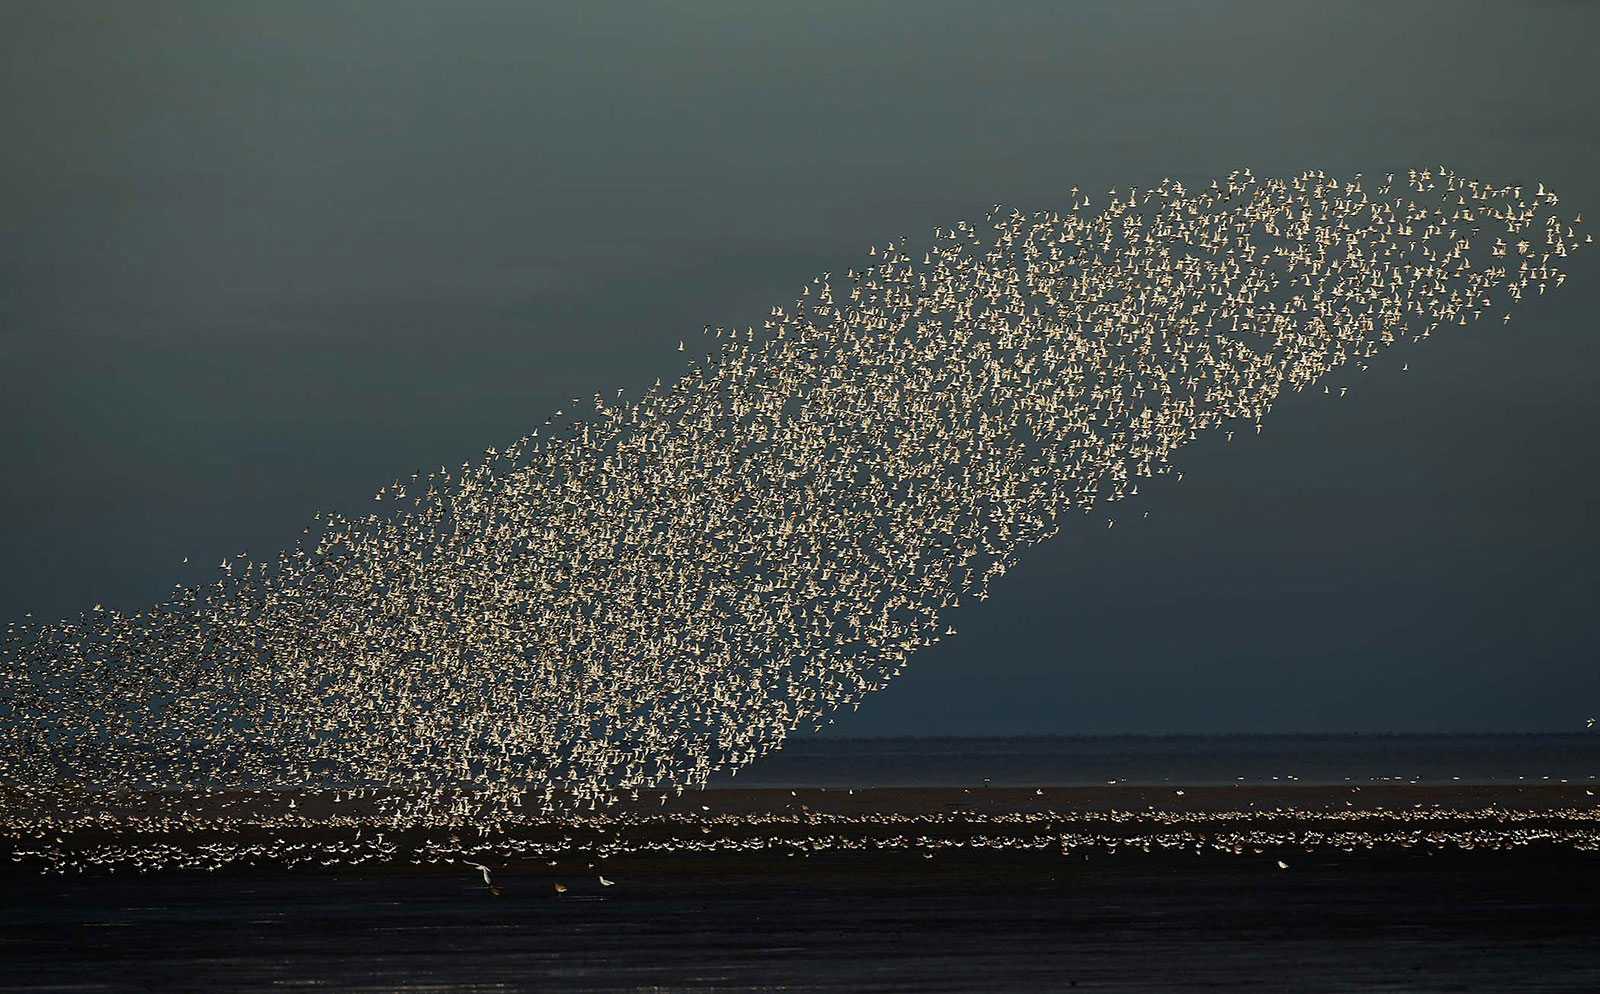 Thousands of birds take off together at the Snettisham Nature Reserve in England